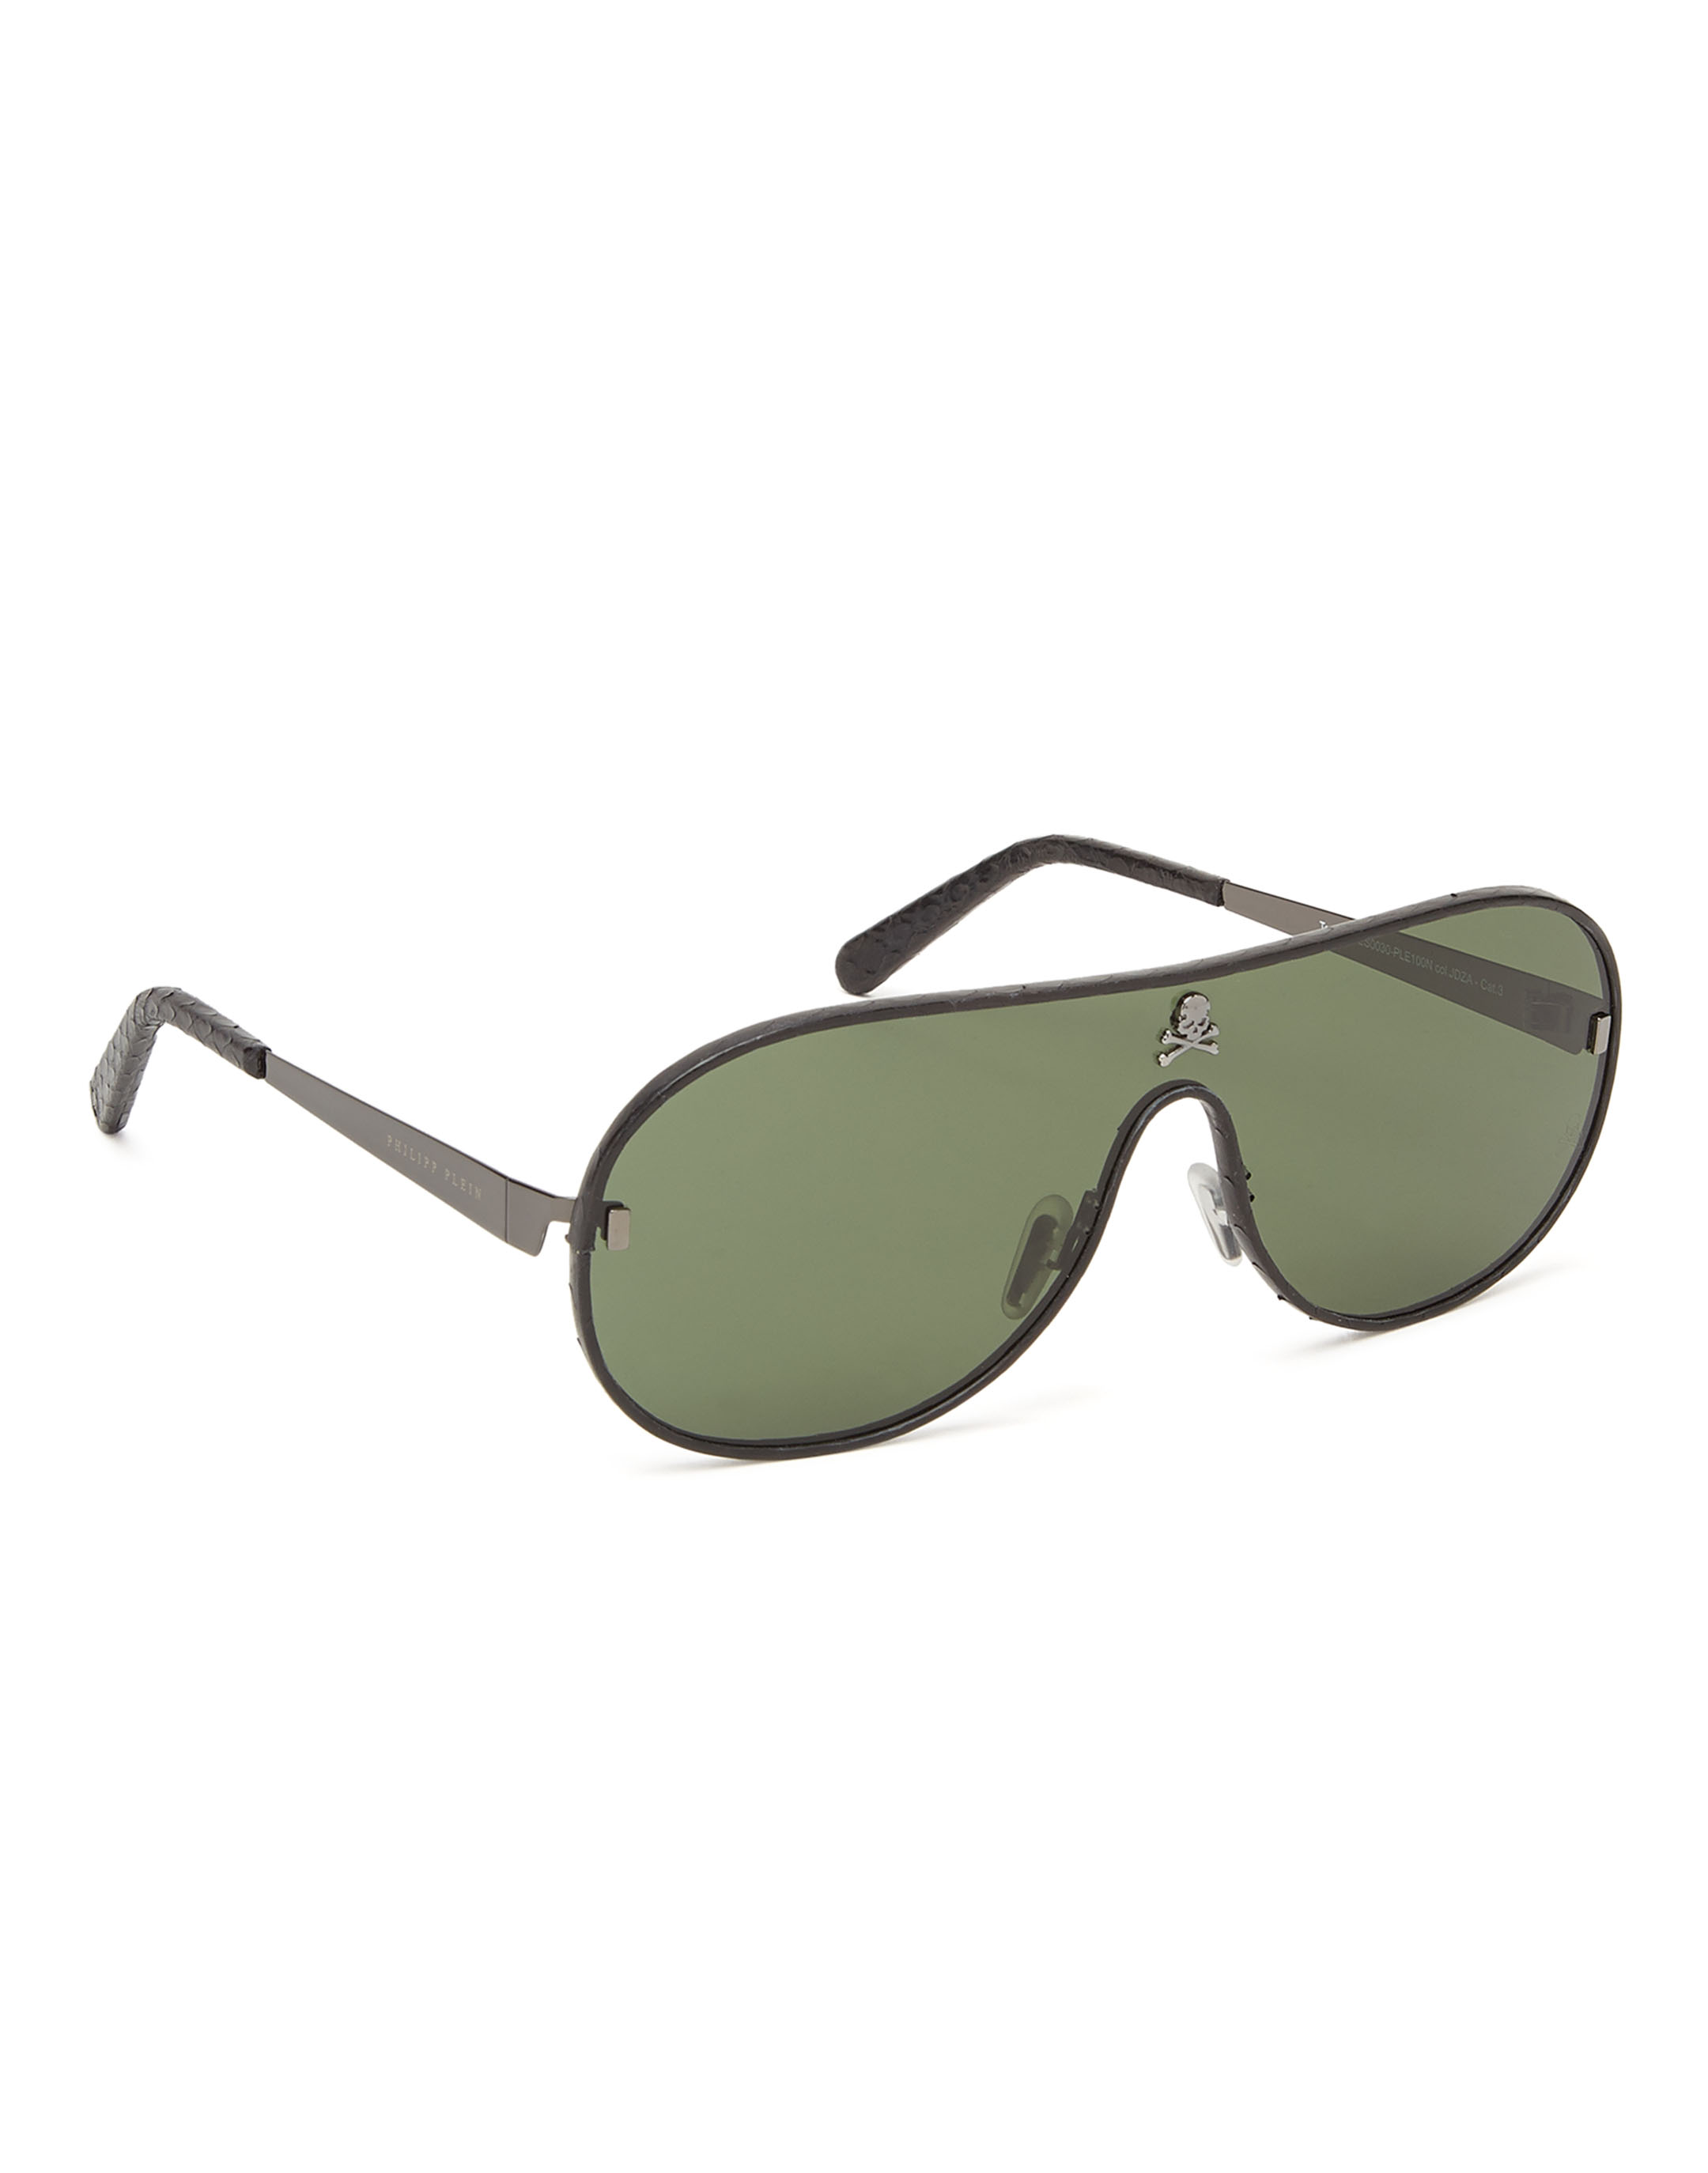 Buy Retro Aviator Sunglasses w/Faux Leather Bridge & Side Shields (Gold &  Brown Leather w/Case, Green Gradient) at Amazon.in